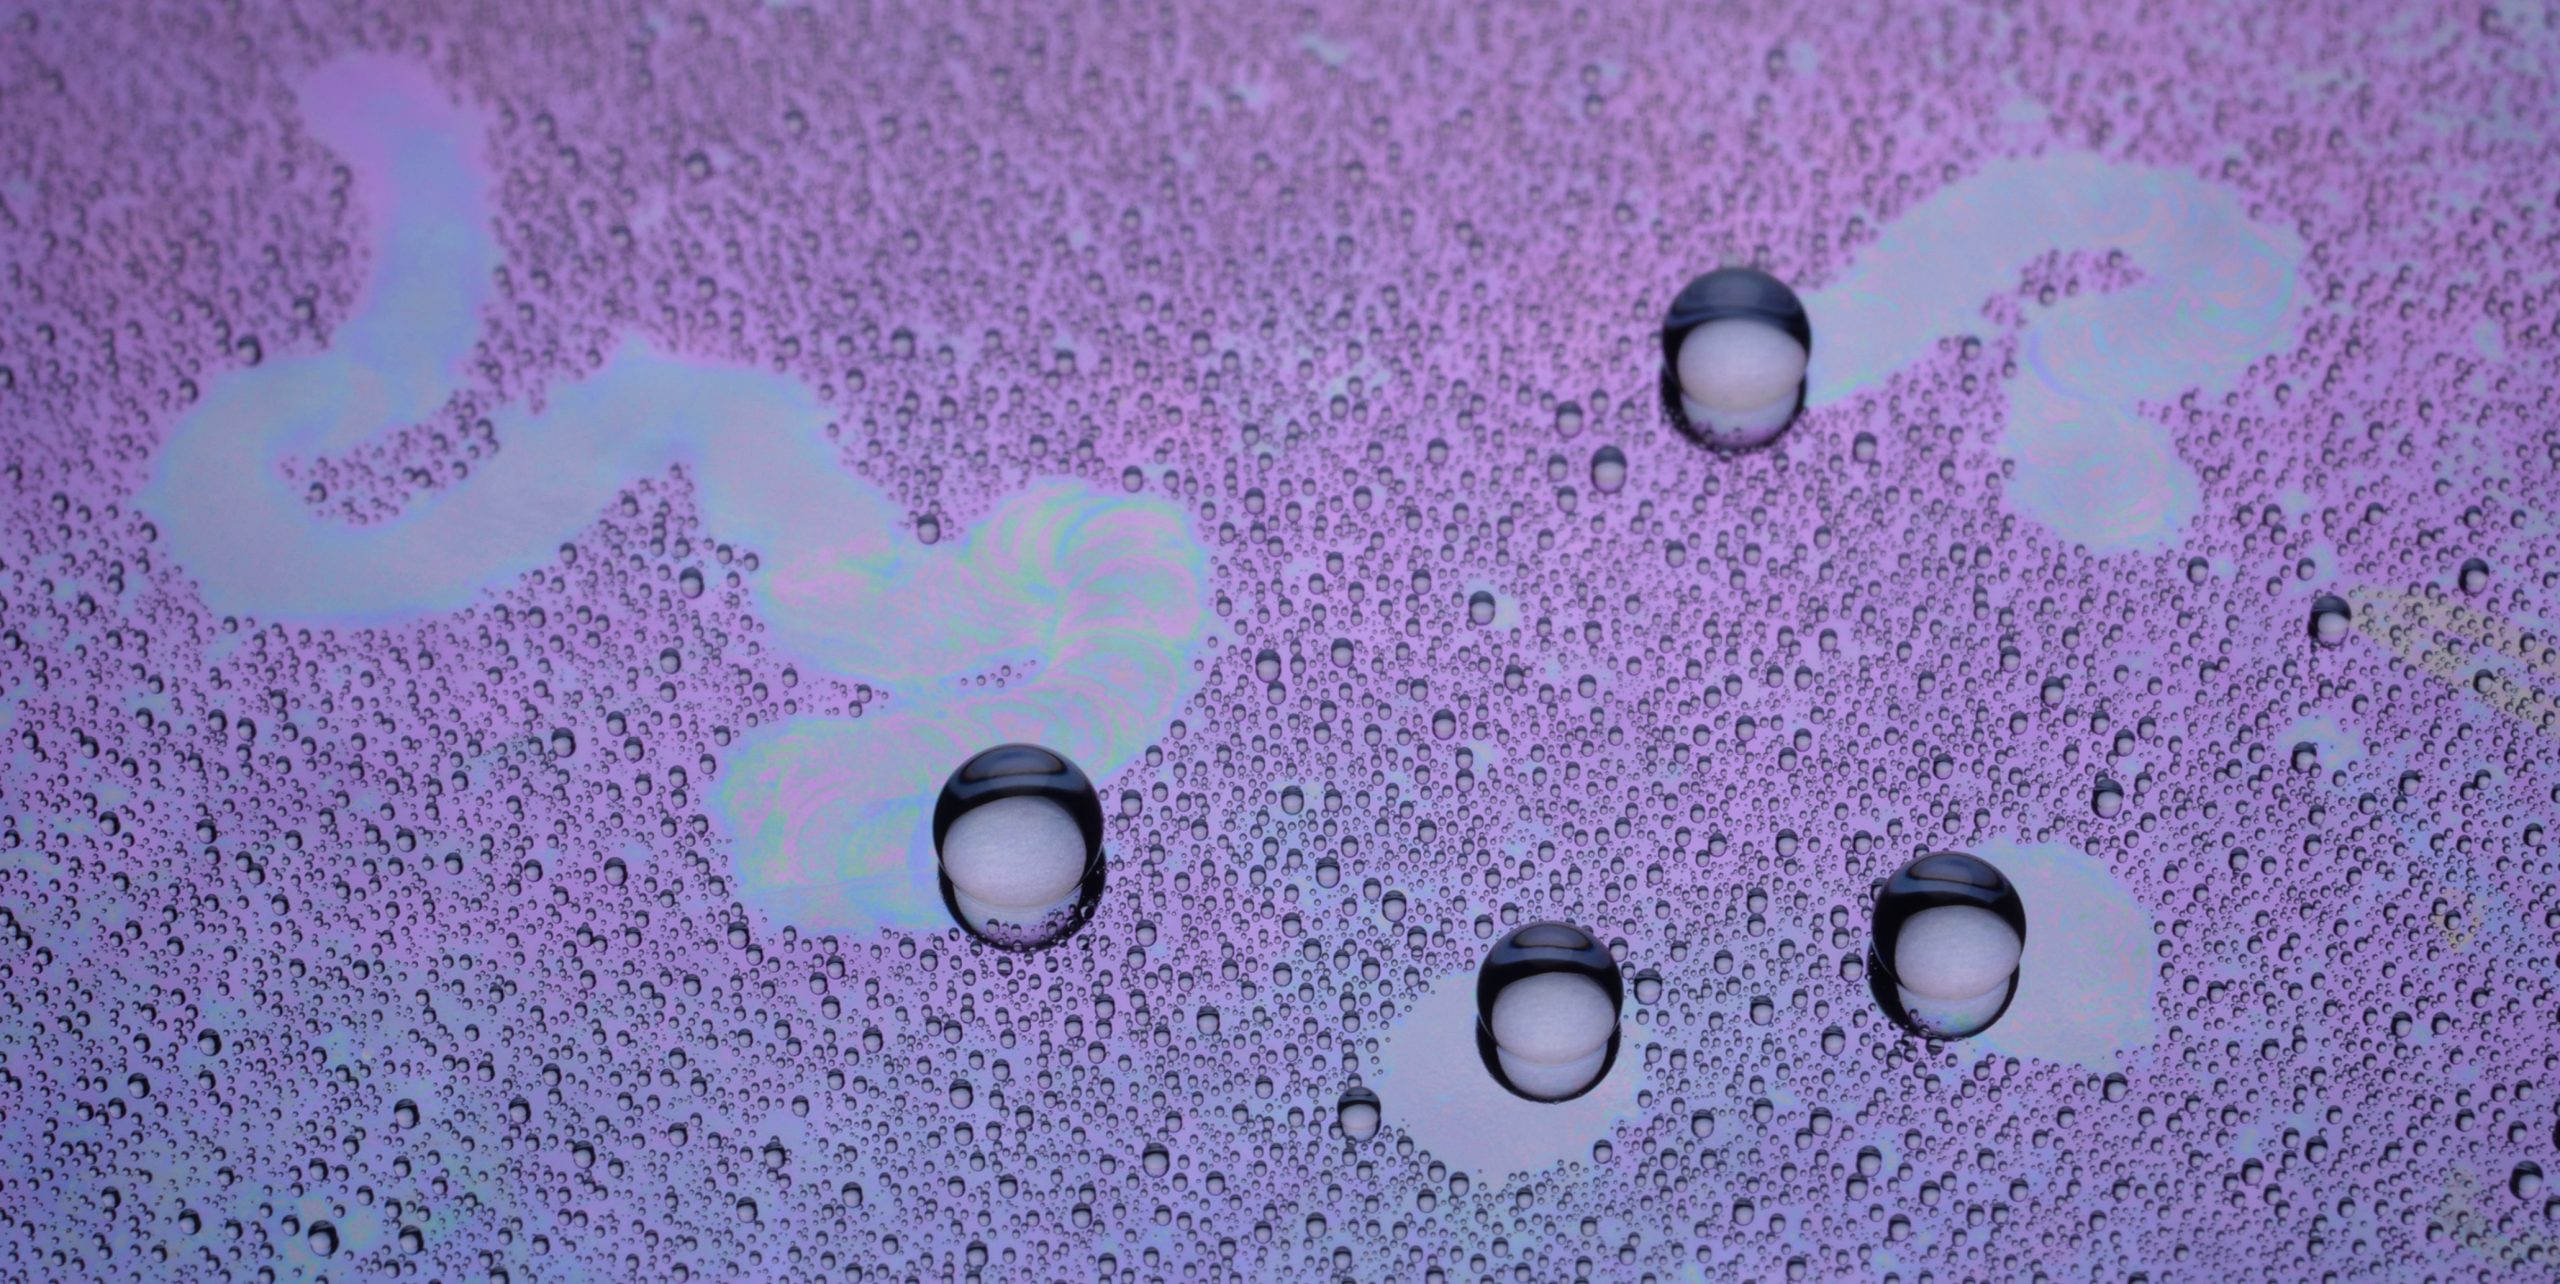 Water-Droplets-Exhibiting-Complex-Collective-Motion-scaled.jpg